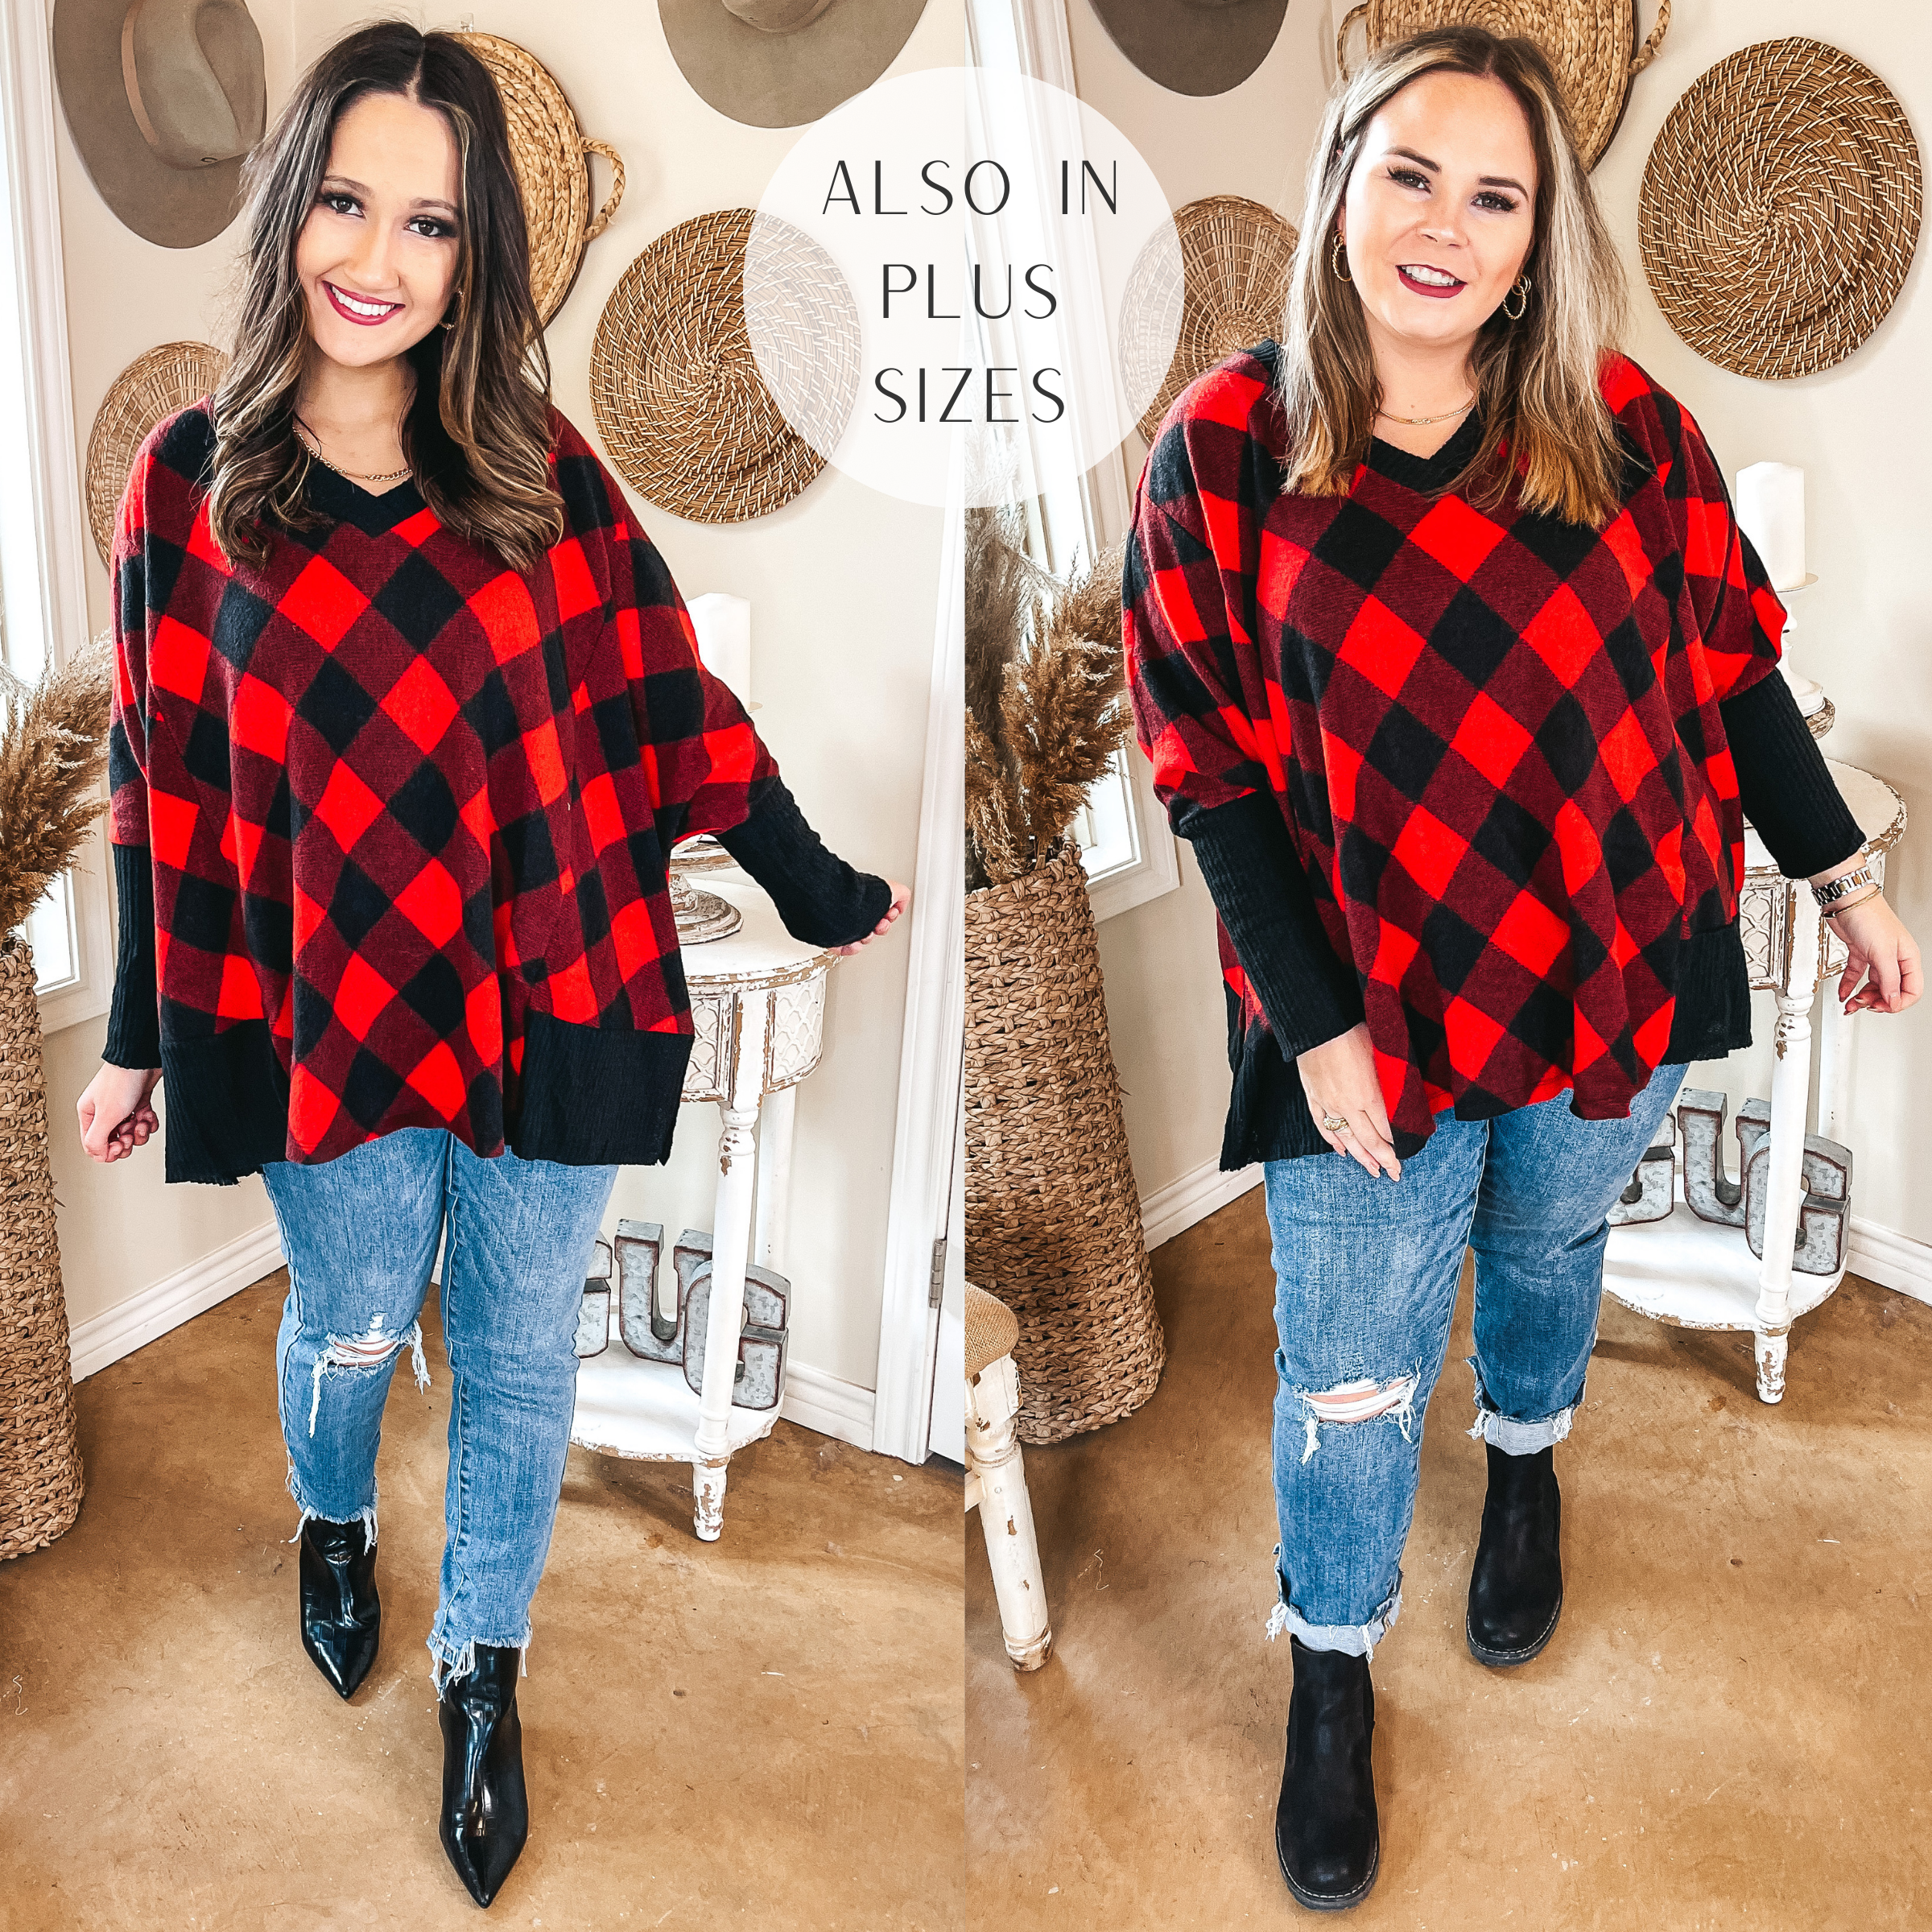 Models are wearing an oversized buffalo plaid long sleeve top. Both models have it paired with destroy knee skinny jeans, black booties, and gold jewelry.